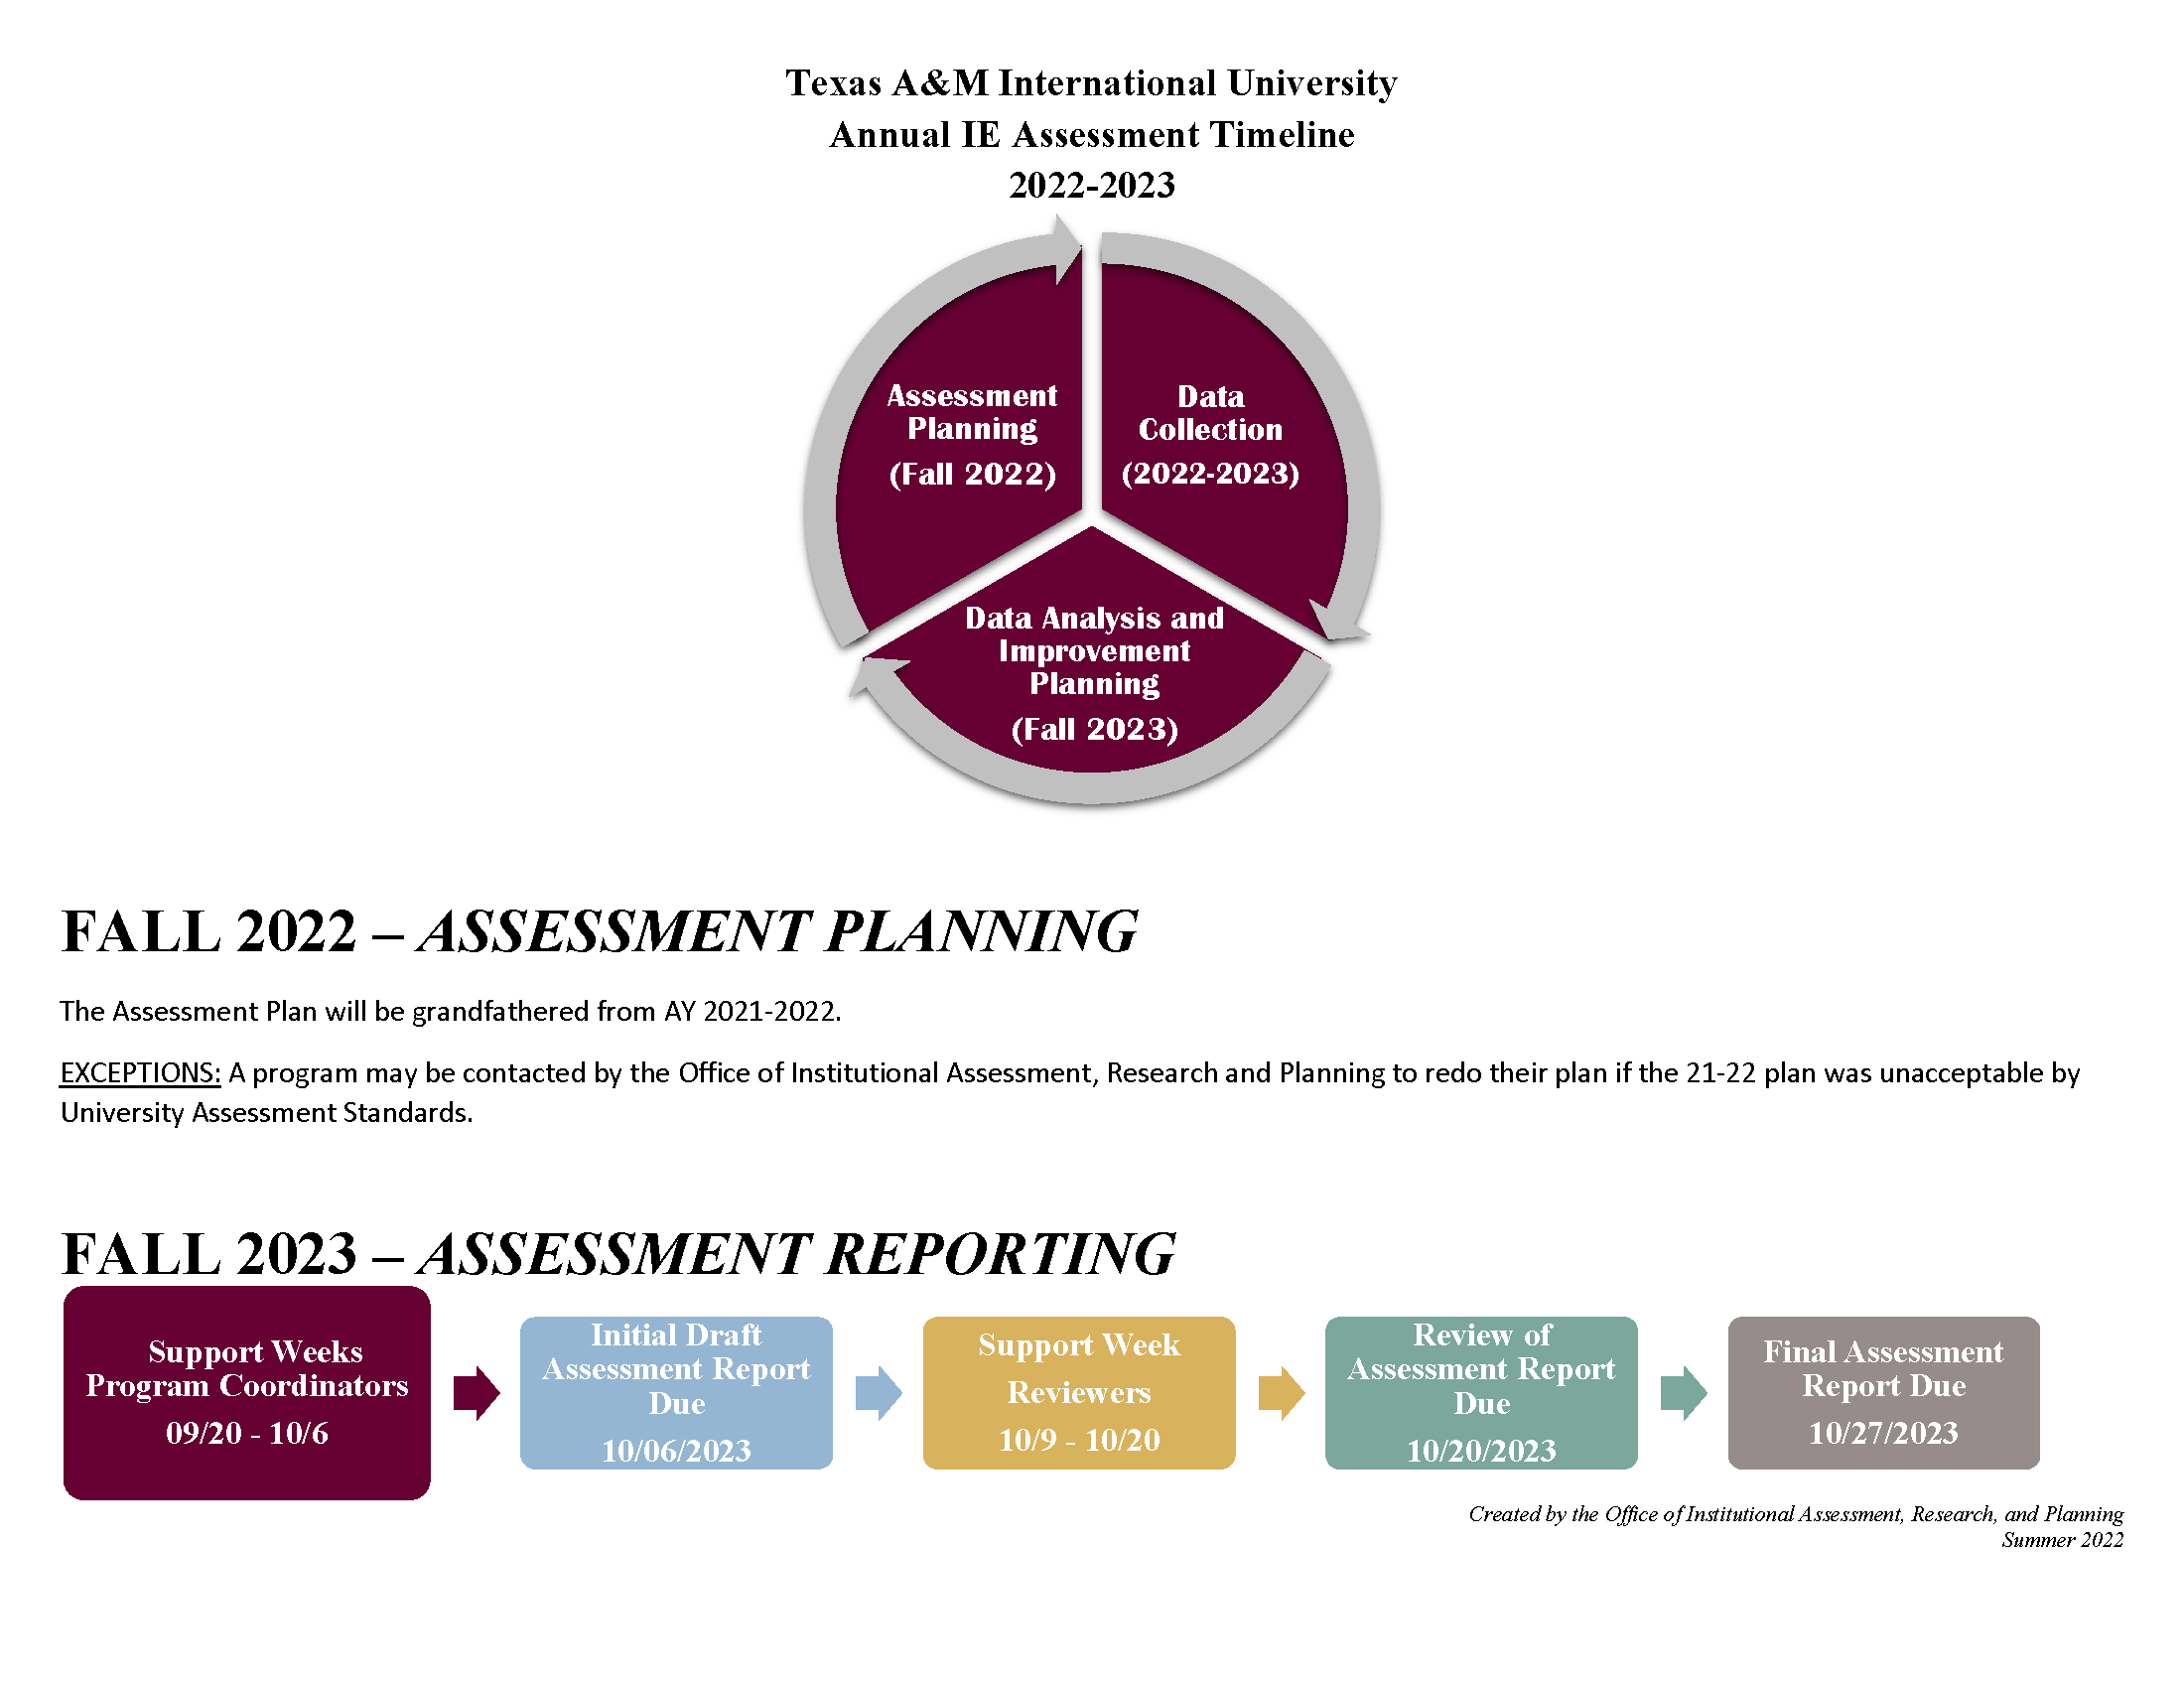 2022-2023 IE Assessment Timeline Pic